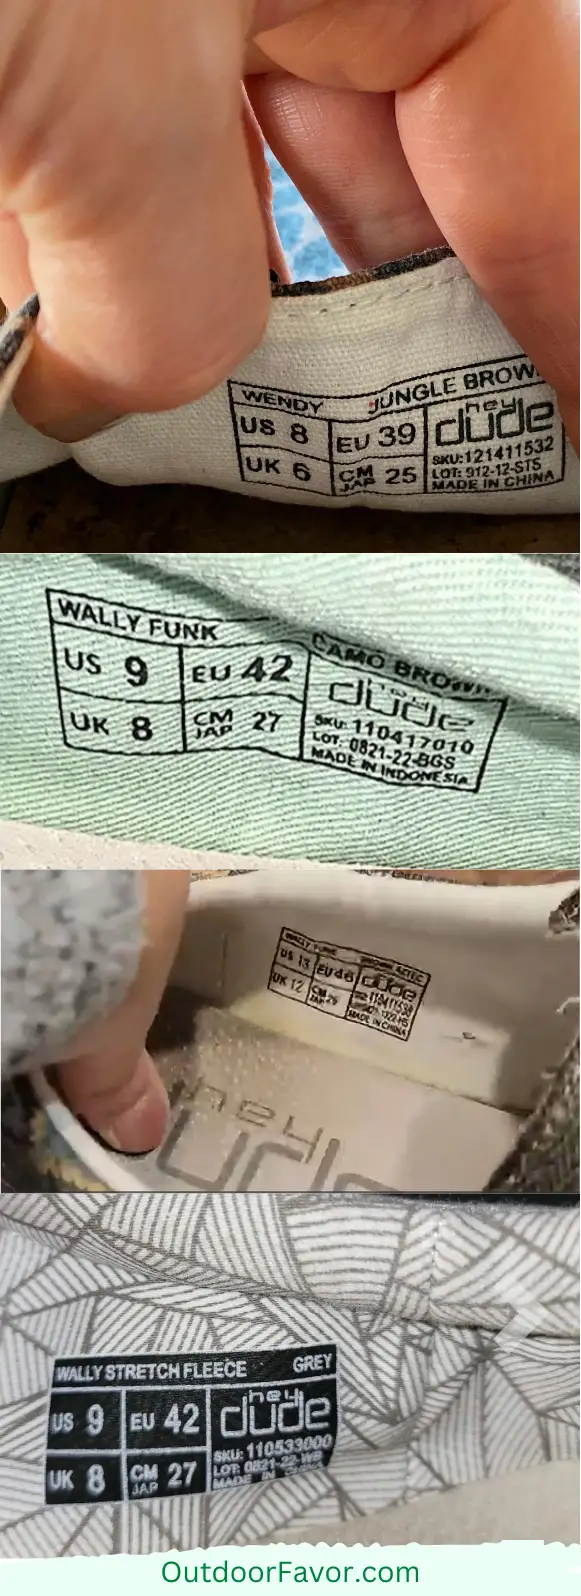 You can check where your Hey Dude shoes are made by looking at the slip attached near the insole.